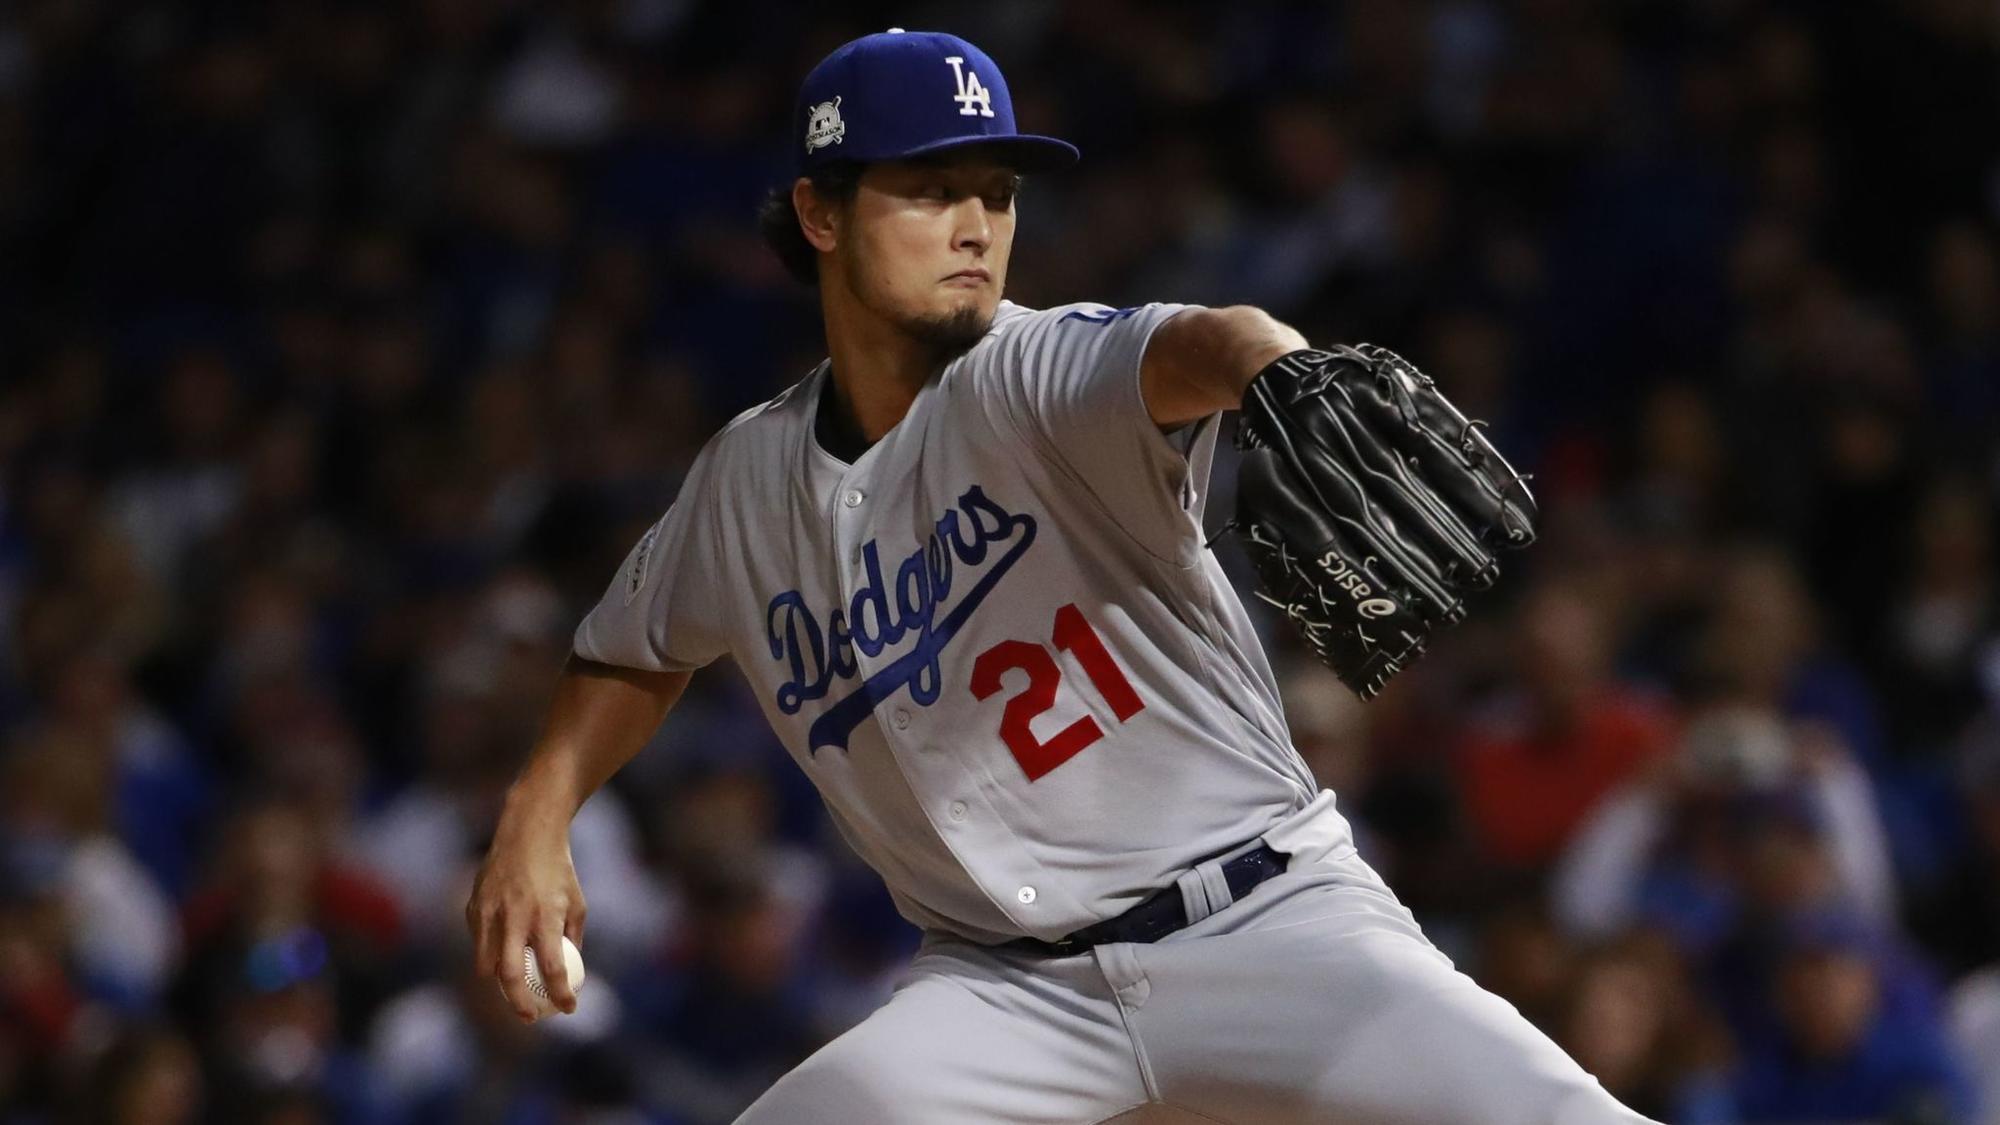 Cubs continue talks with free-agent Yu Darvish as spring training looms